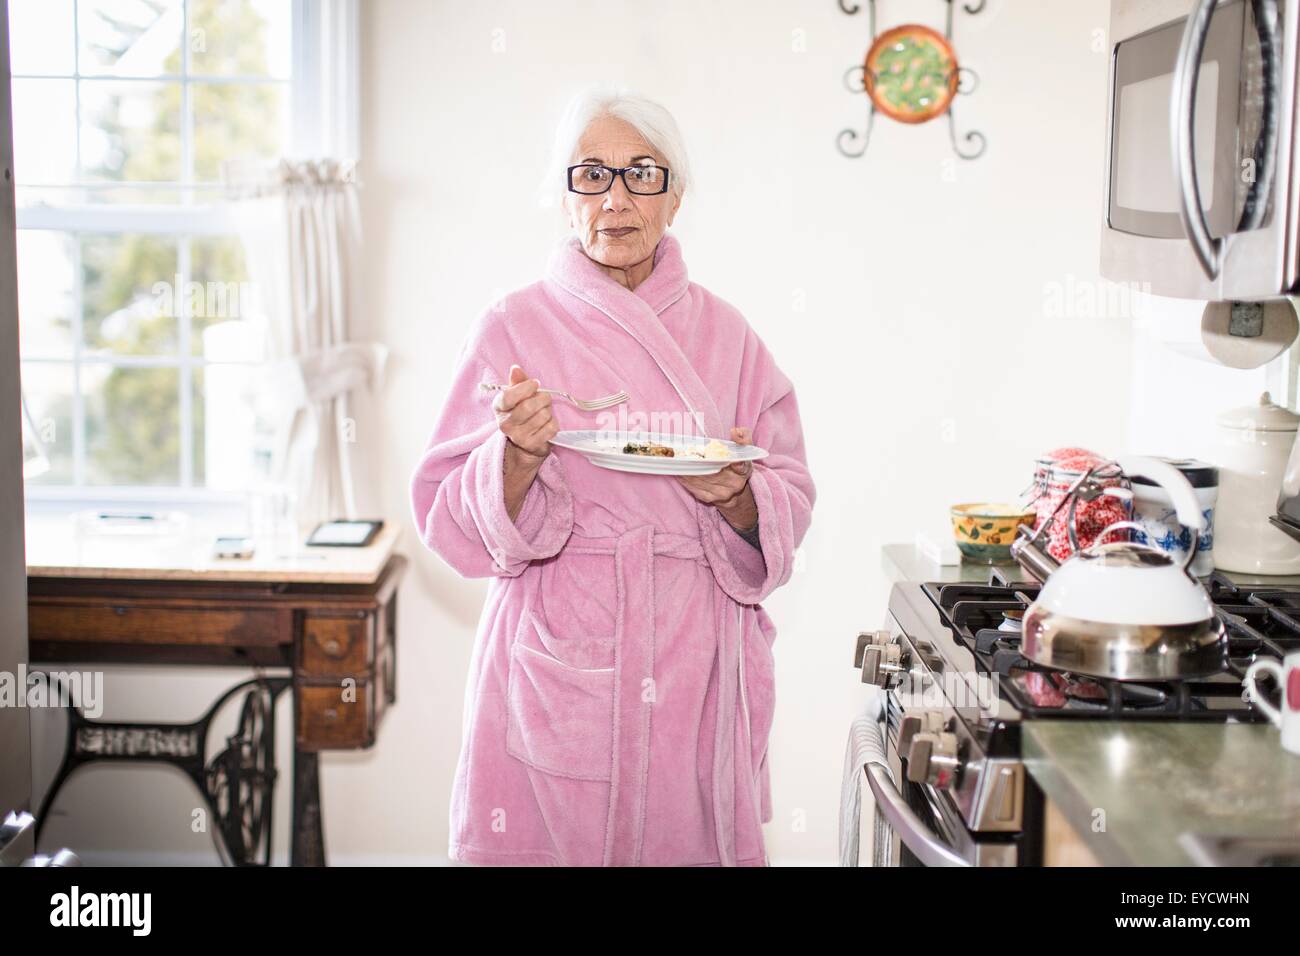 Senior woman standing in kitchen holding plate of food Banque D'Images